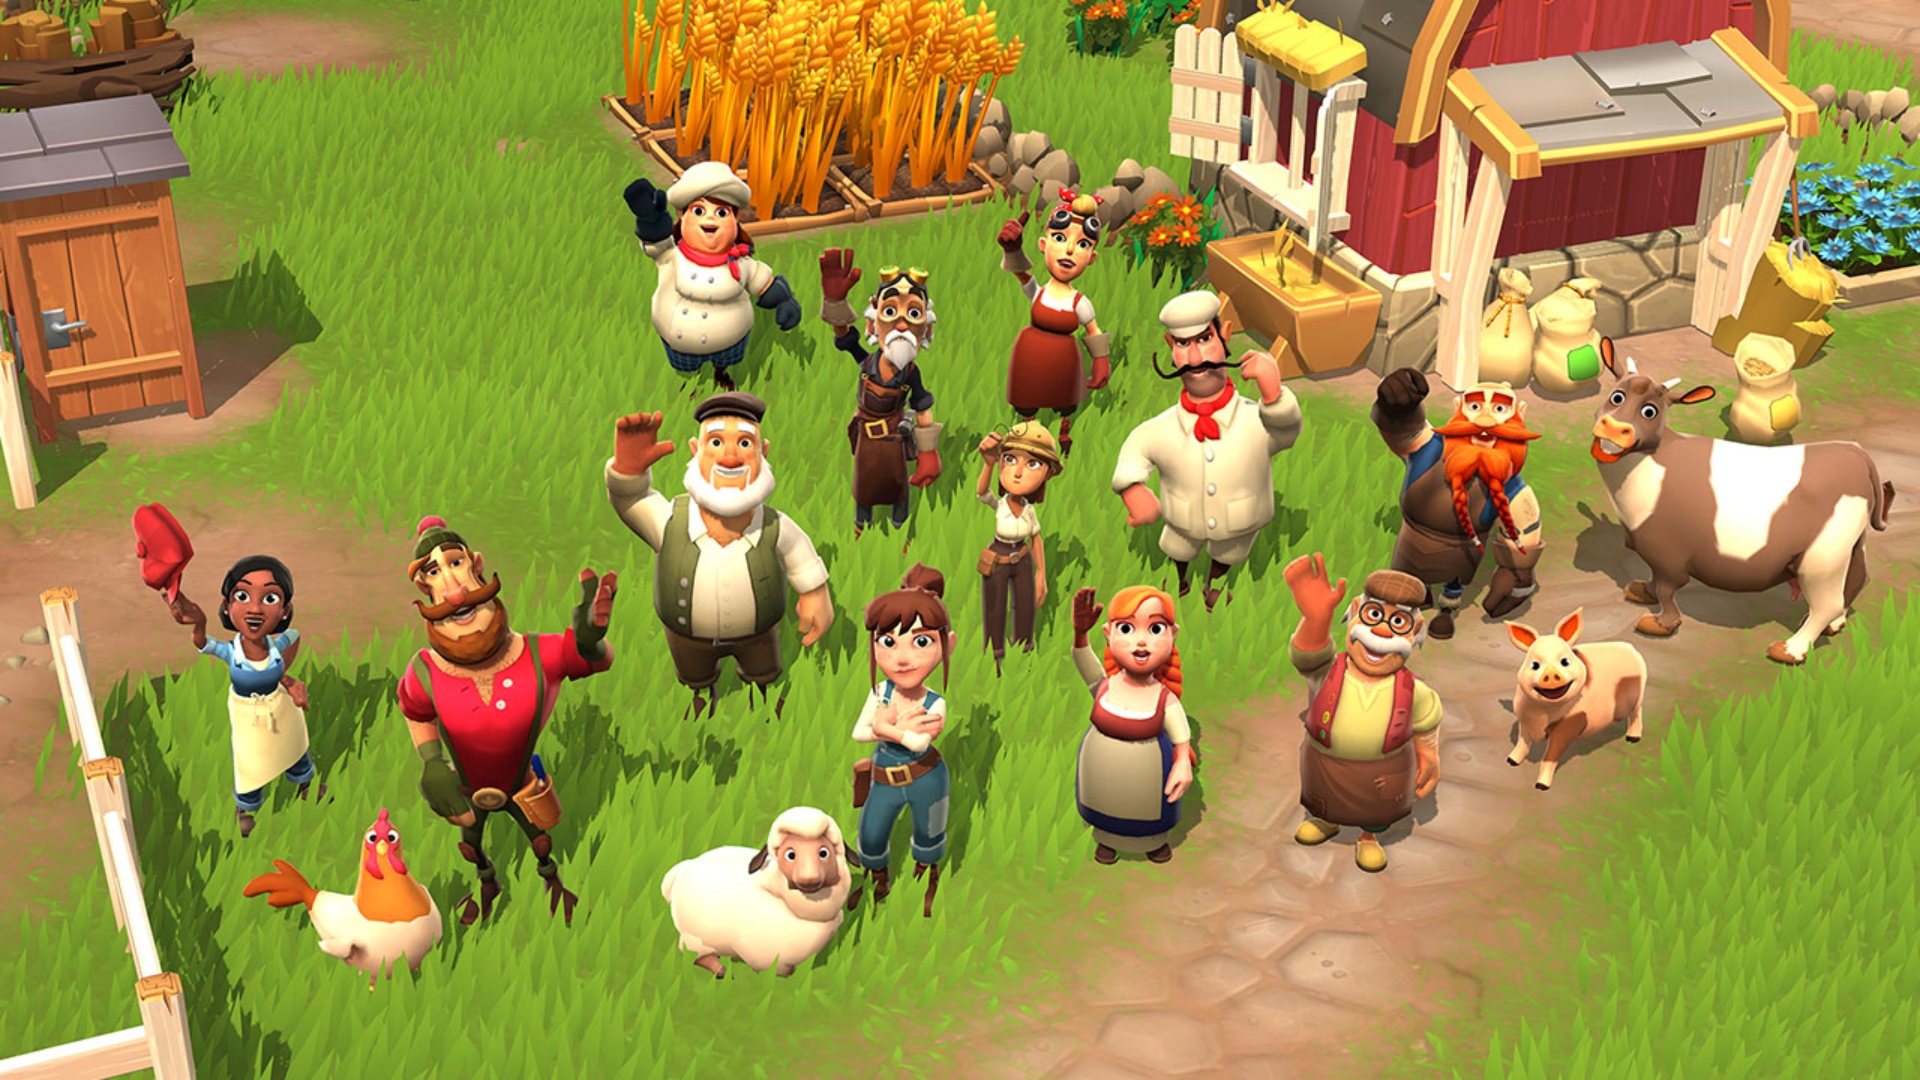 Animal games: Sunrise Village. Image shows a selection of people and animals waving at the camera from a farm.